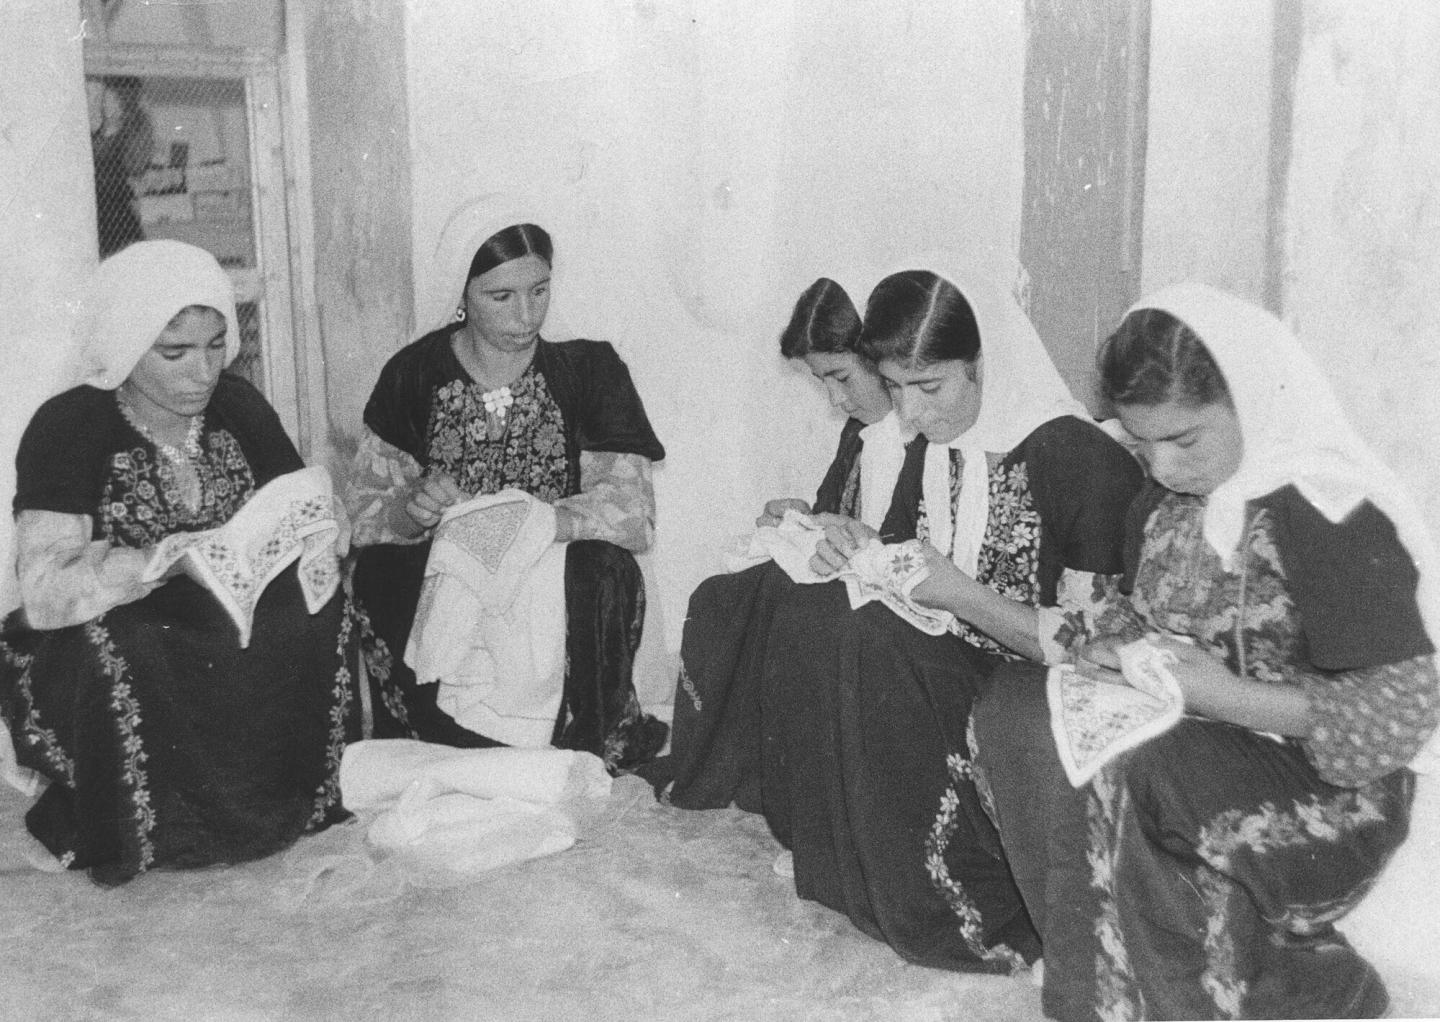 A black and white photo of five Palestinian women sewing together